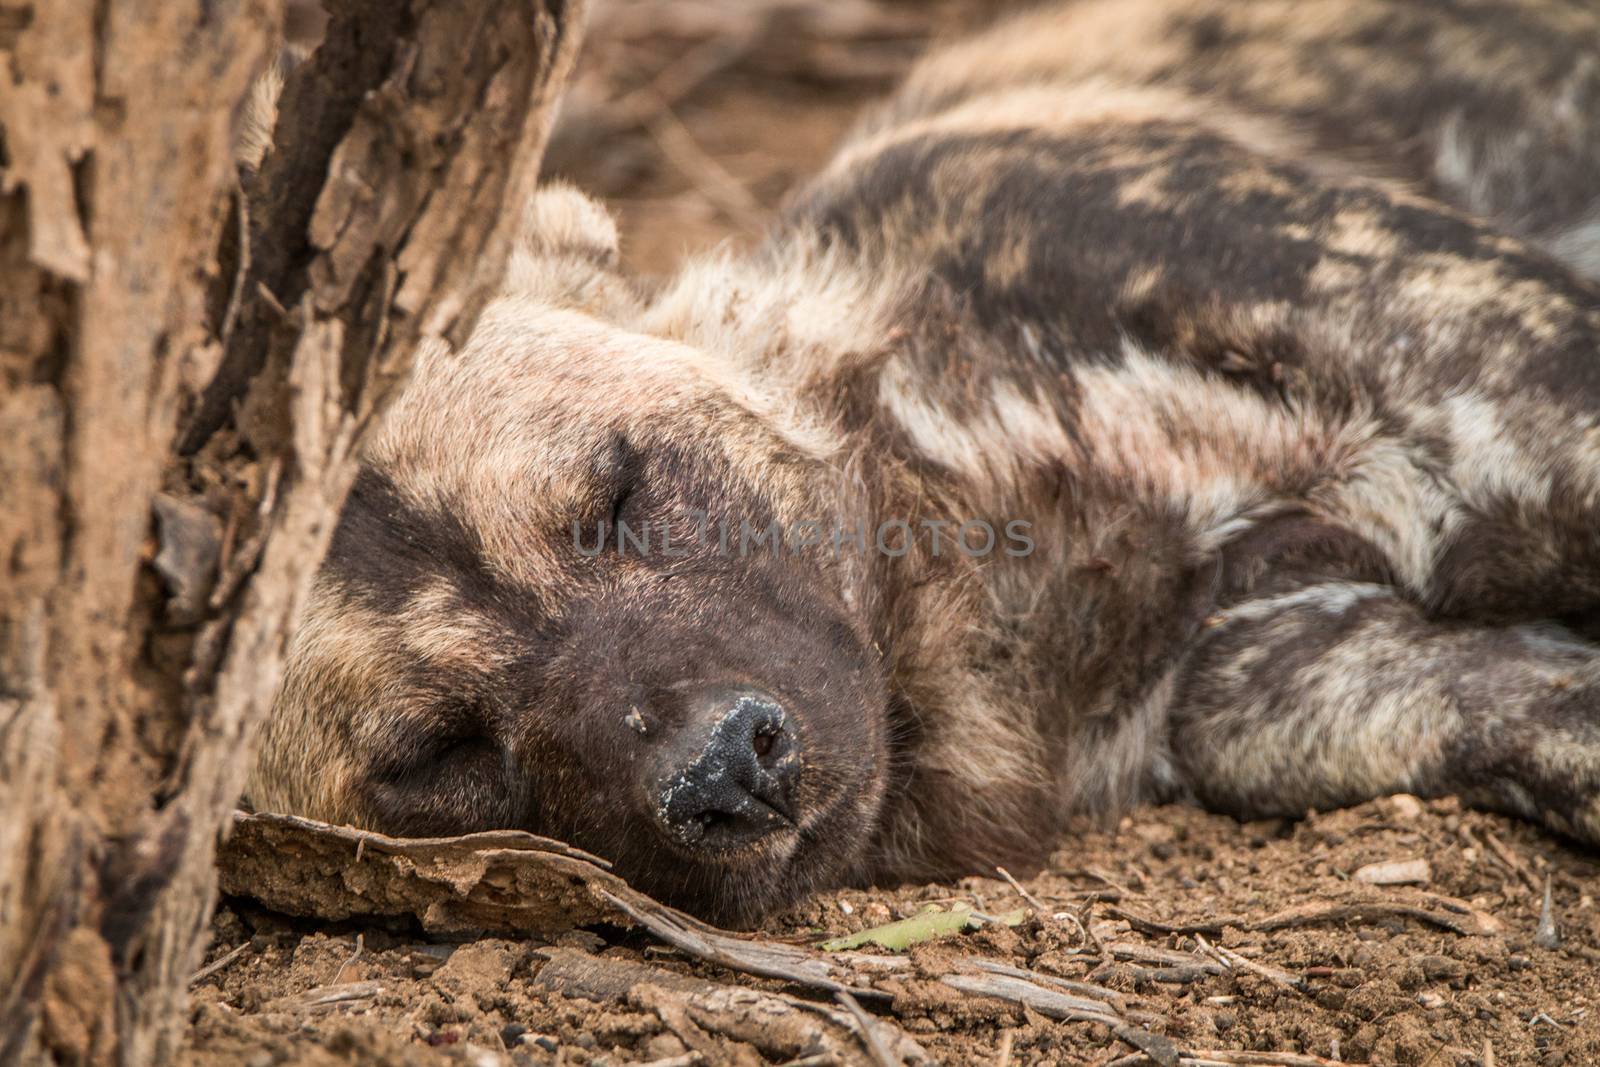 Sleeping African wild dog in the Kruger National Park, South Africa.